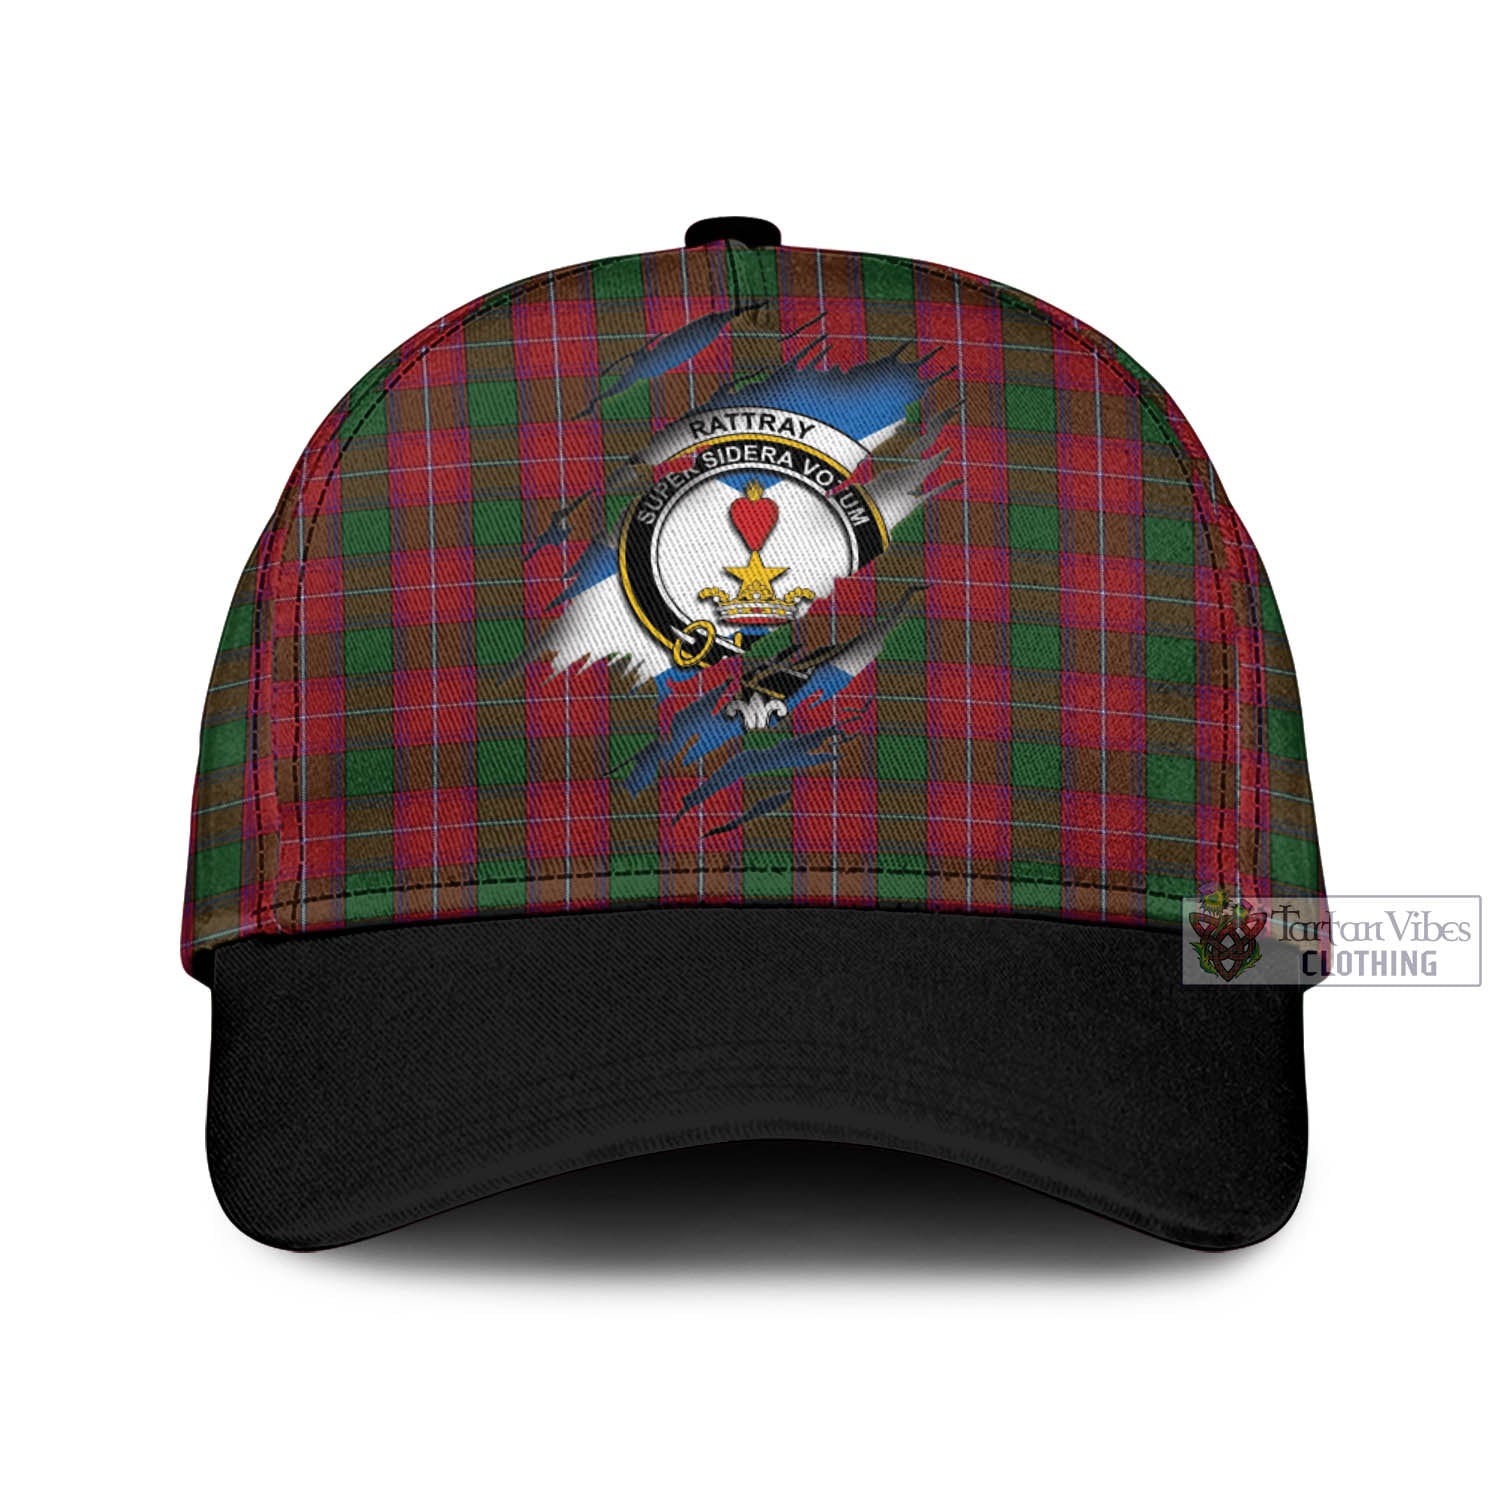 Tartan Vibes Clothing Rattray Tartan Classic Cap with Family Crest In Me Style